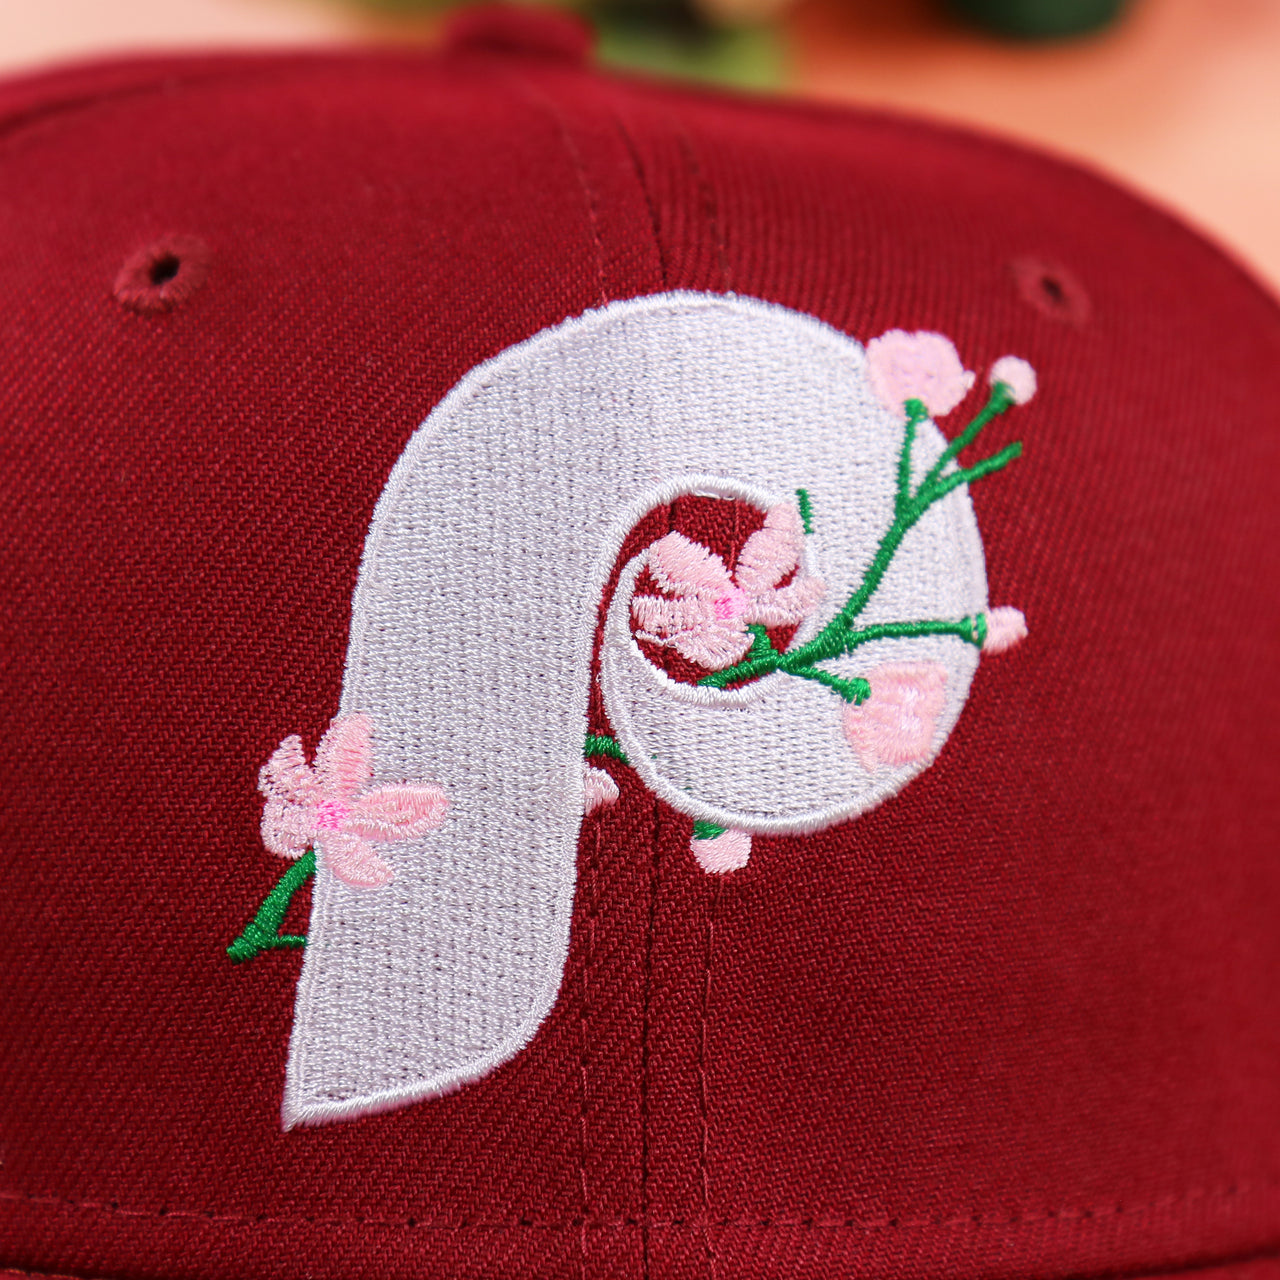 The Cooperstown Phillies Sakura Logo on the Cooperstown Philadelphia Philadelphia Pink Undervisor Sakura Tree Embroidered 59Fifty Fitted Cap | Maroon 59Fifty Cap